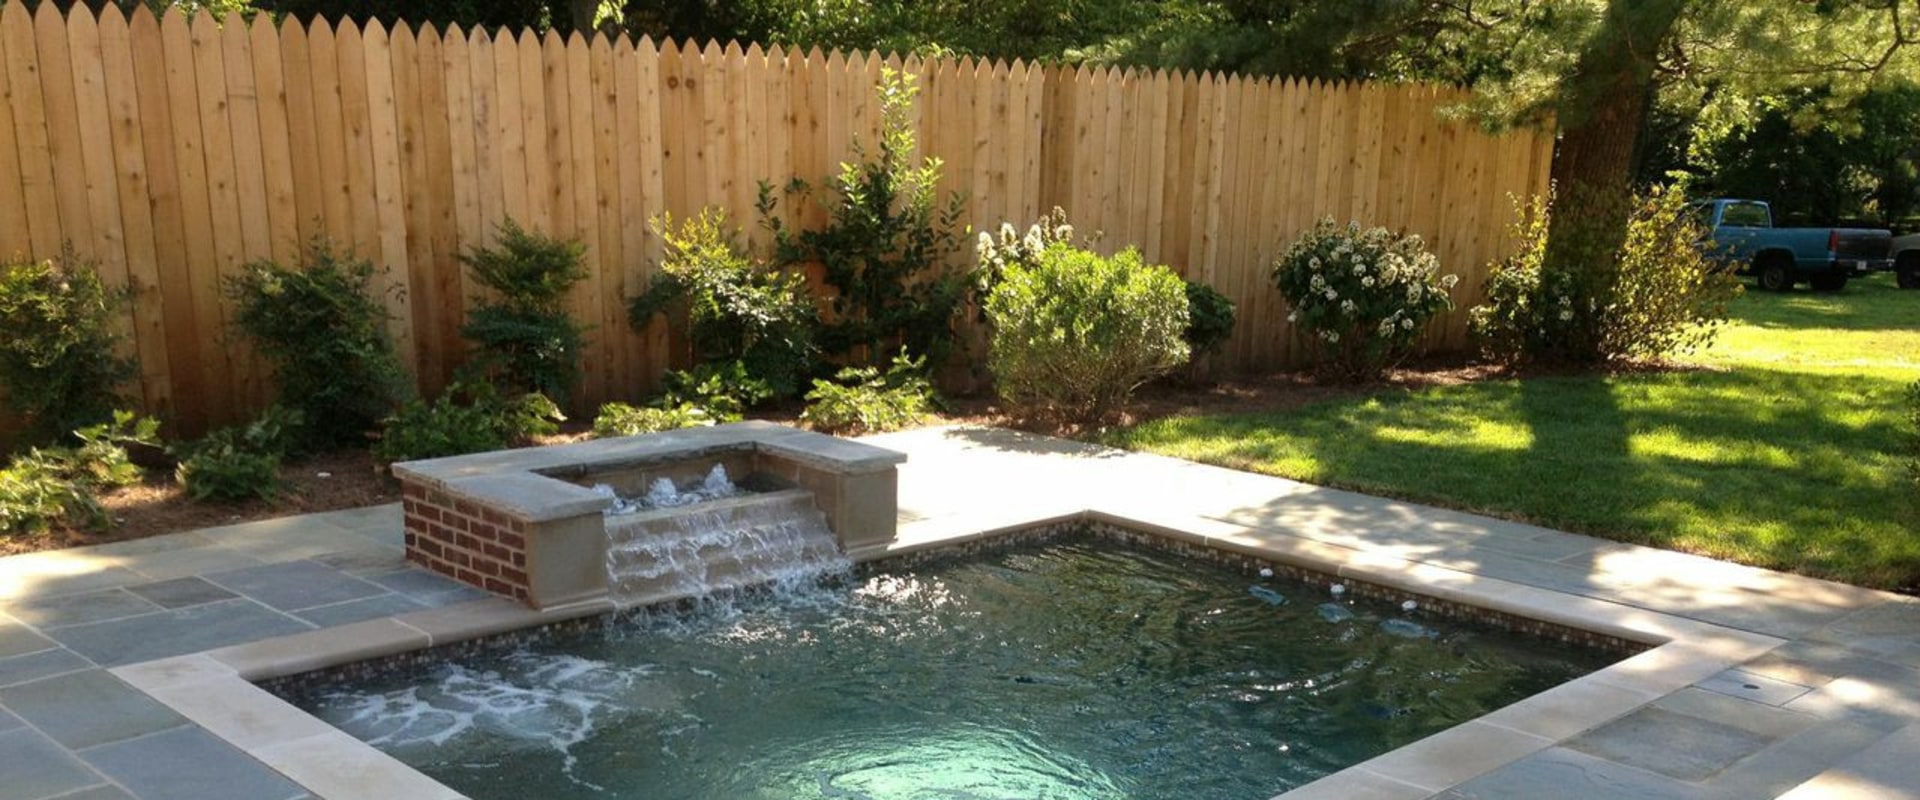 Outdoor Hot Tub Designs For Your Hardscaping Project In New York